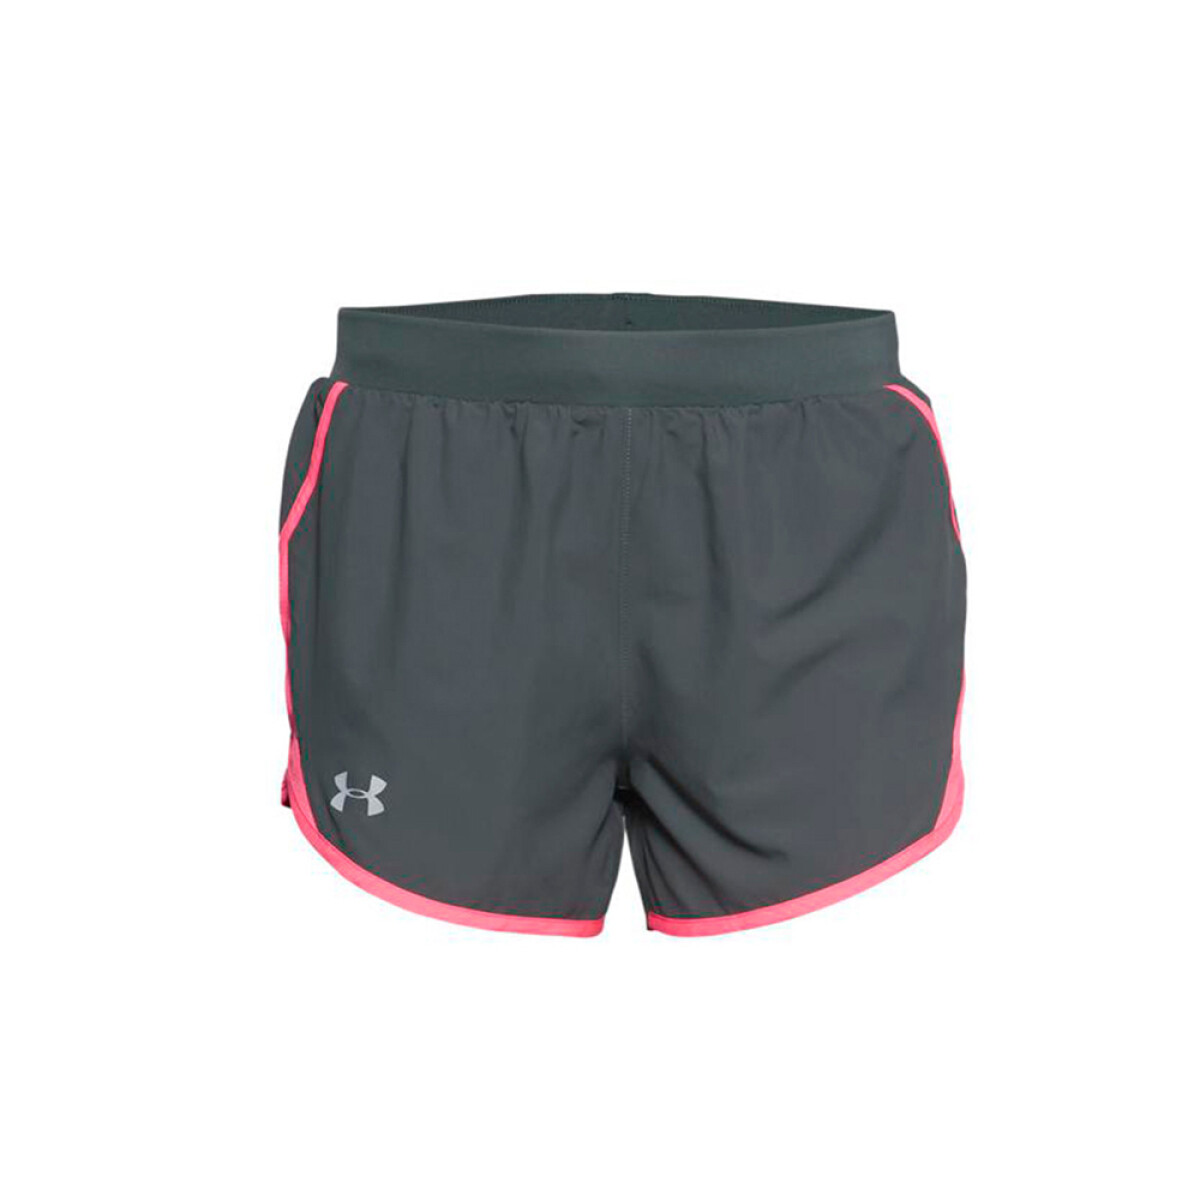 SHORT UNDER ARMOUR UA FLY BY 2.0 - Grey/Pink 